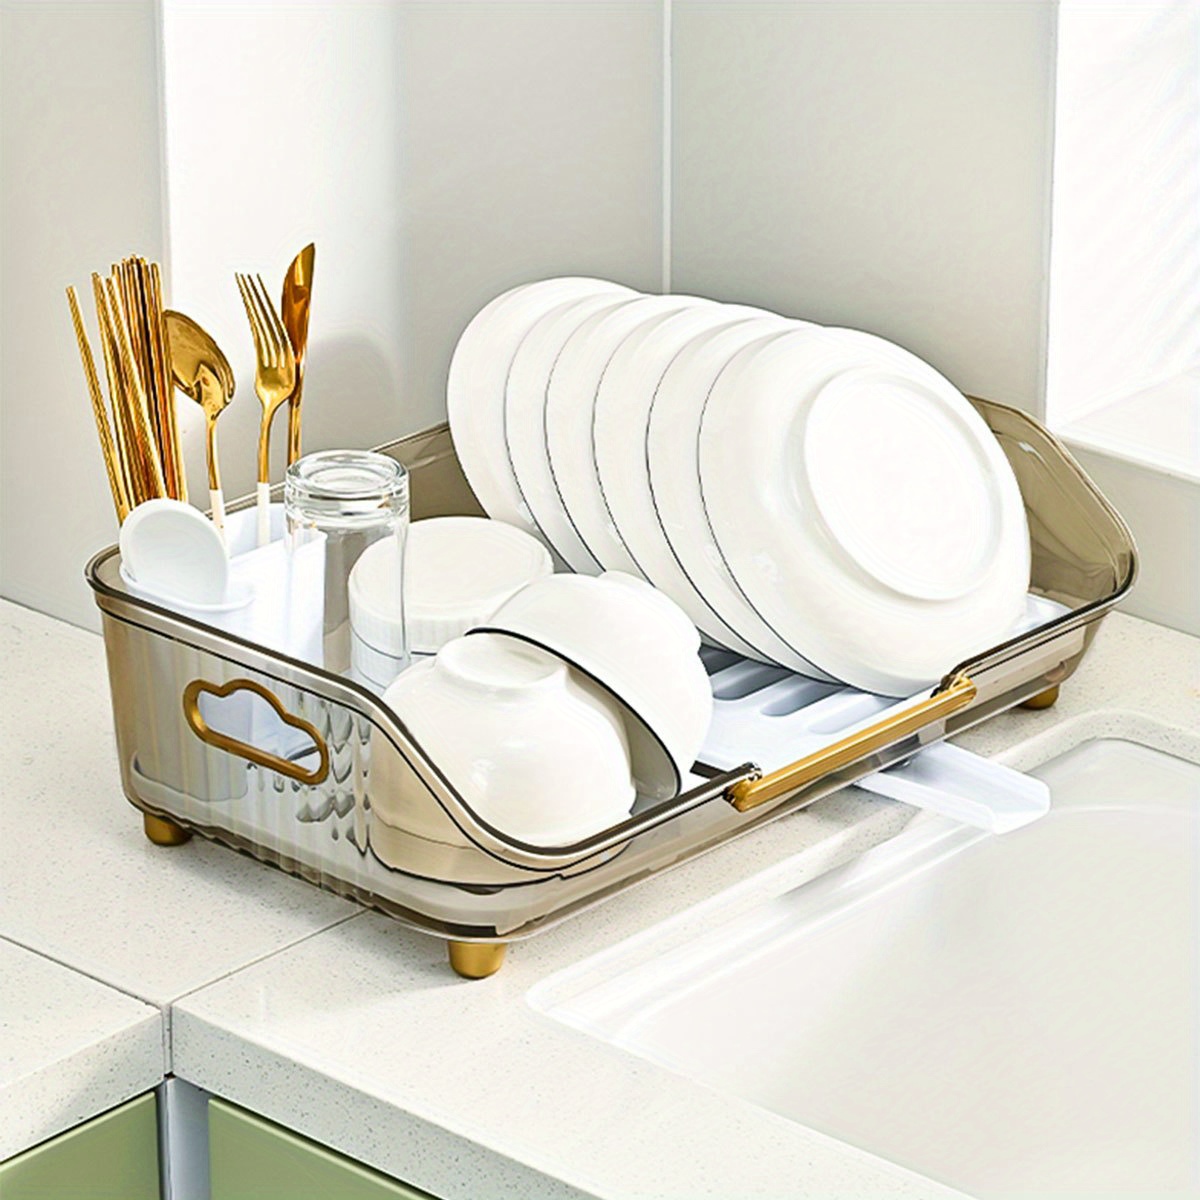 Space Saving Tableware Drying Rack With Draining Spout - Durable